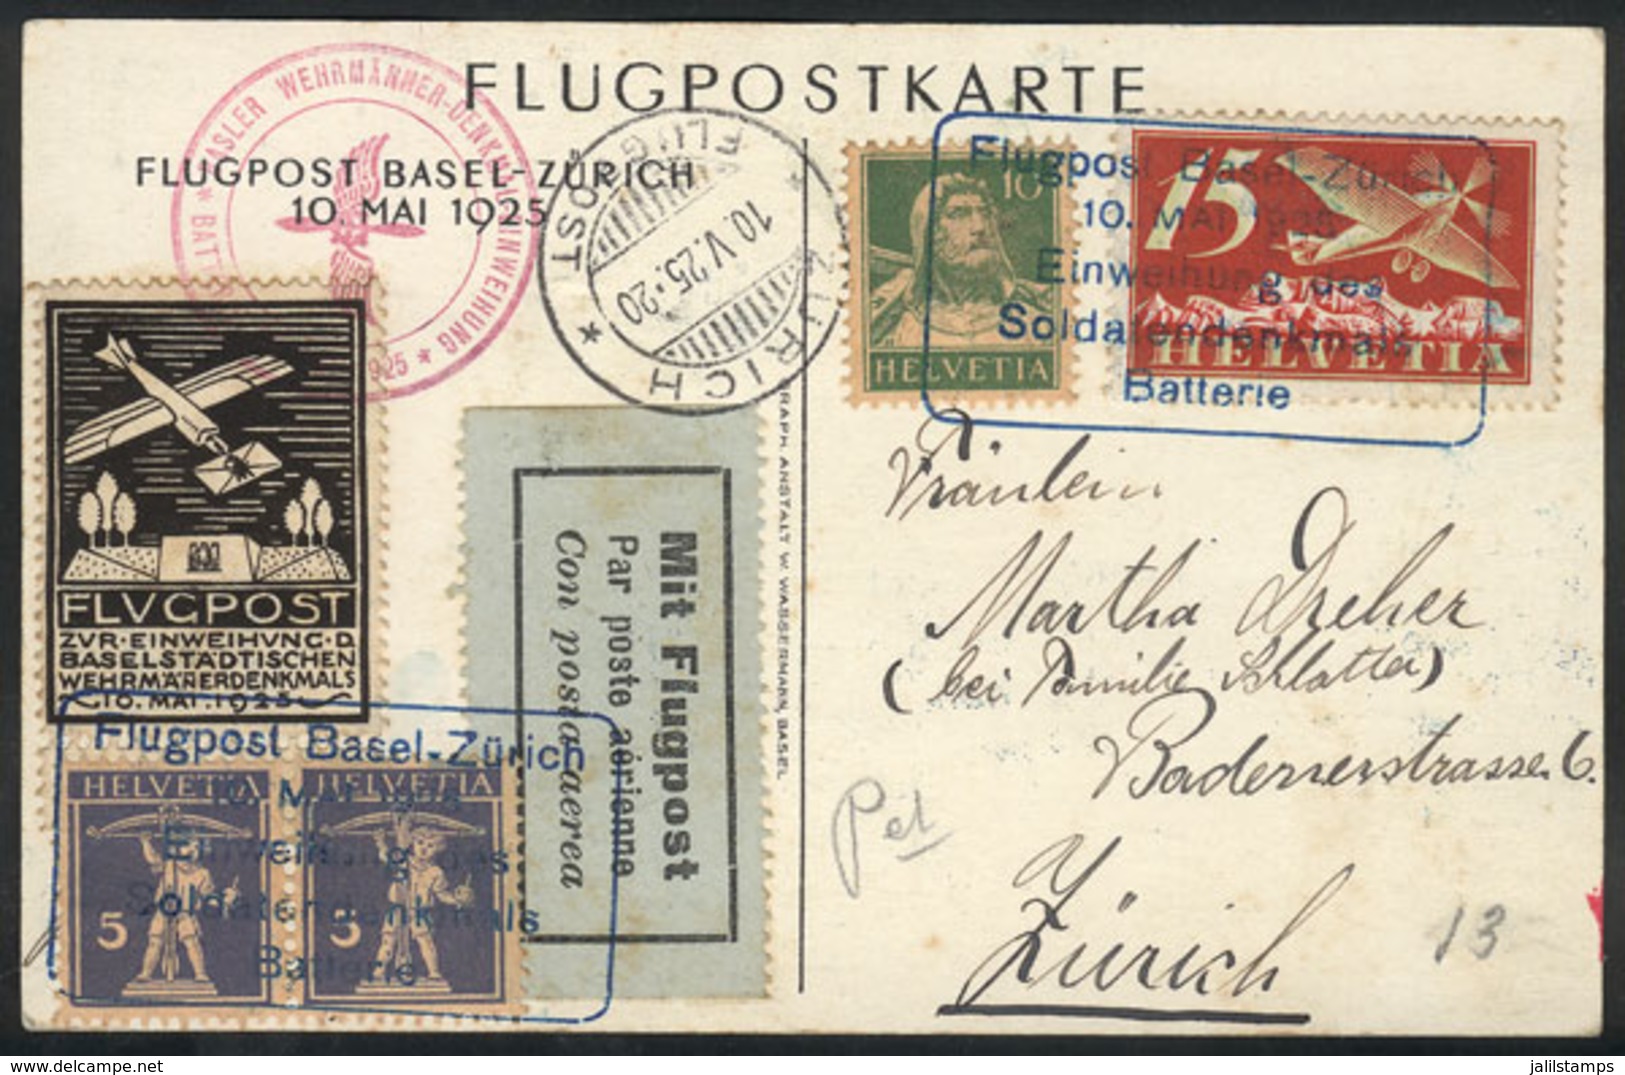 872 SWITZERLAND: 10/MAY/1925 Flight Basel - Zürich, Postcard With Cinderella And Special Cancels, VF Quality! - ...-1845 Prephilately